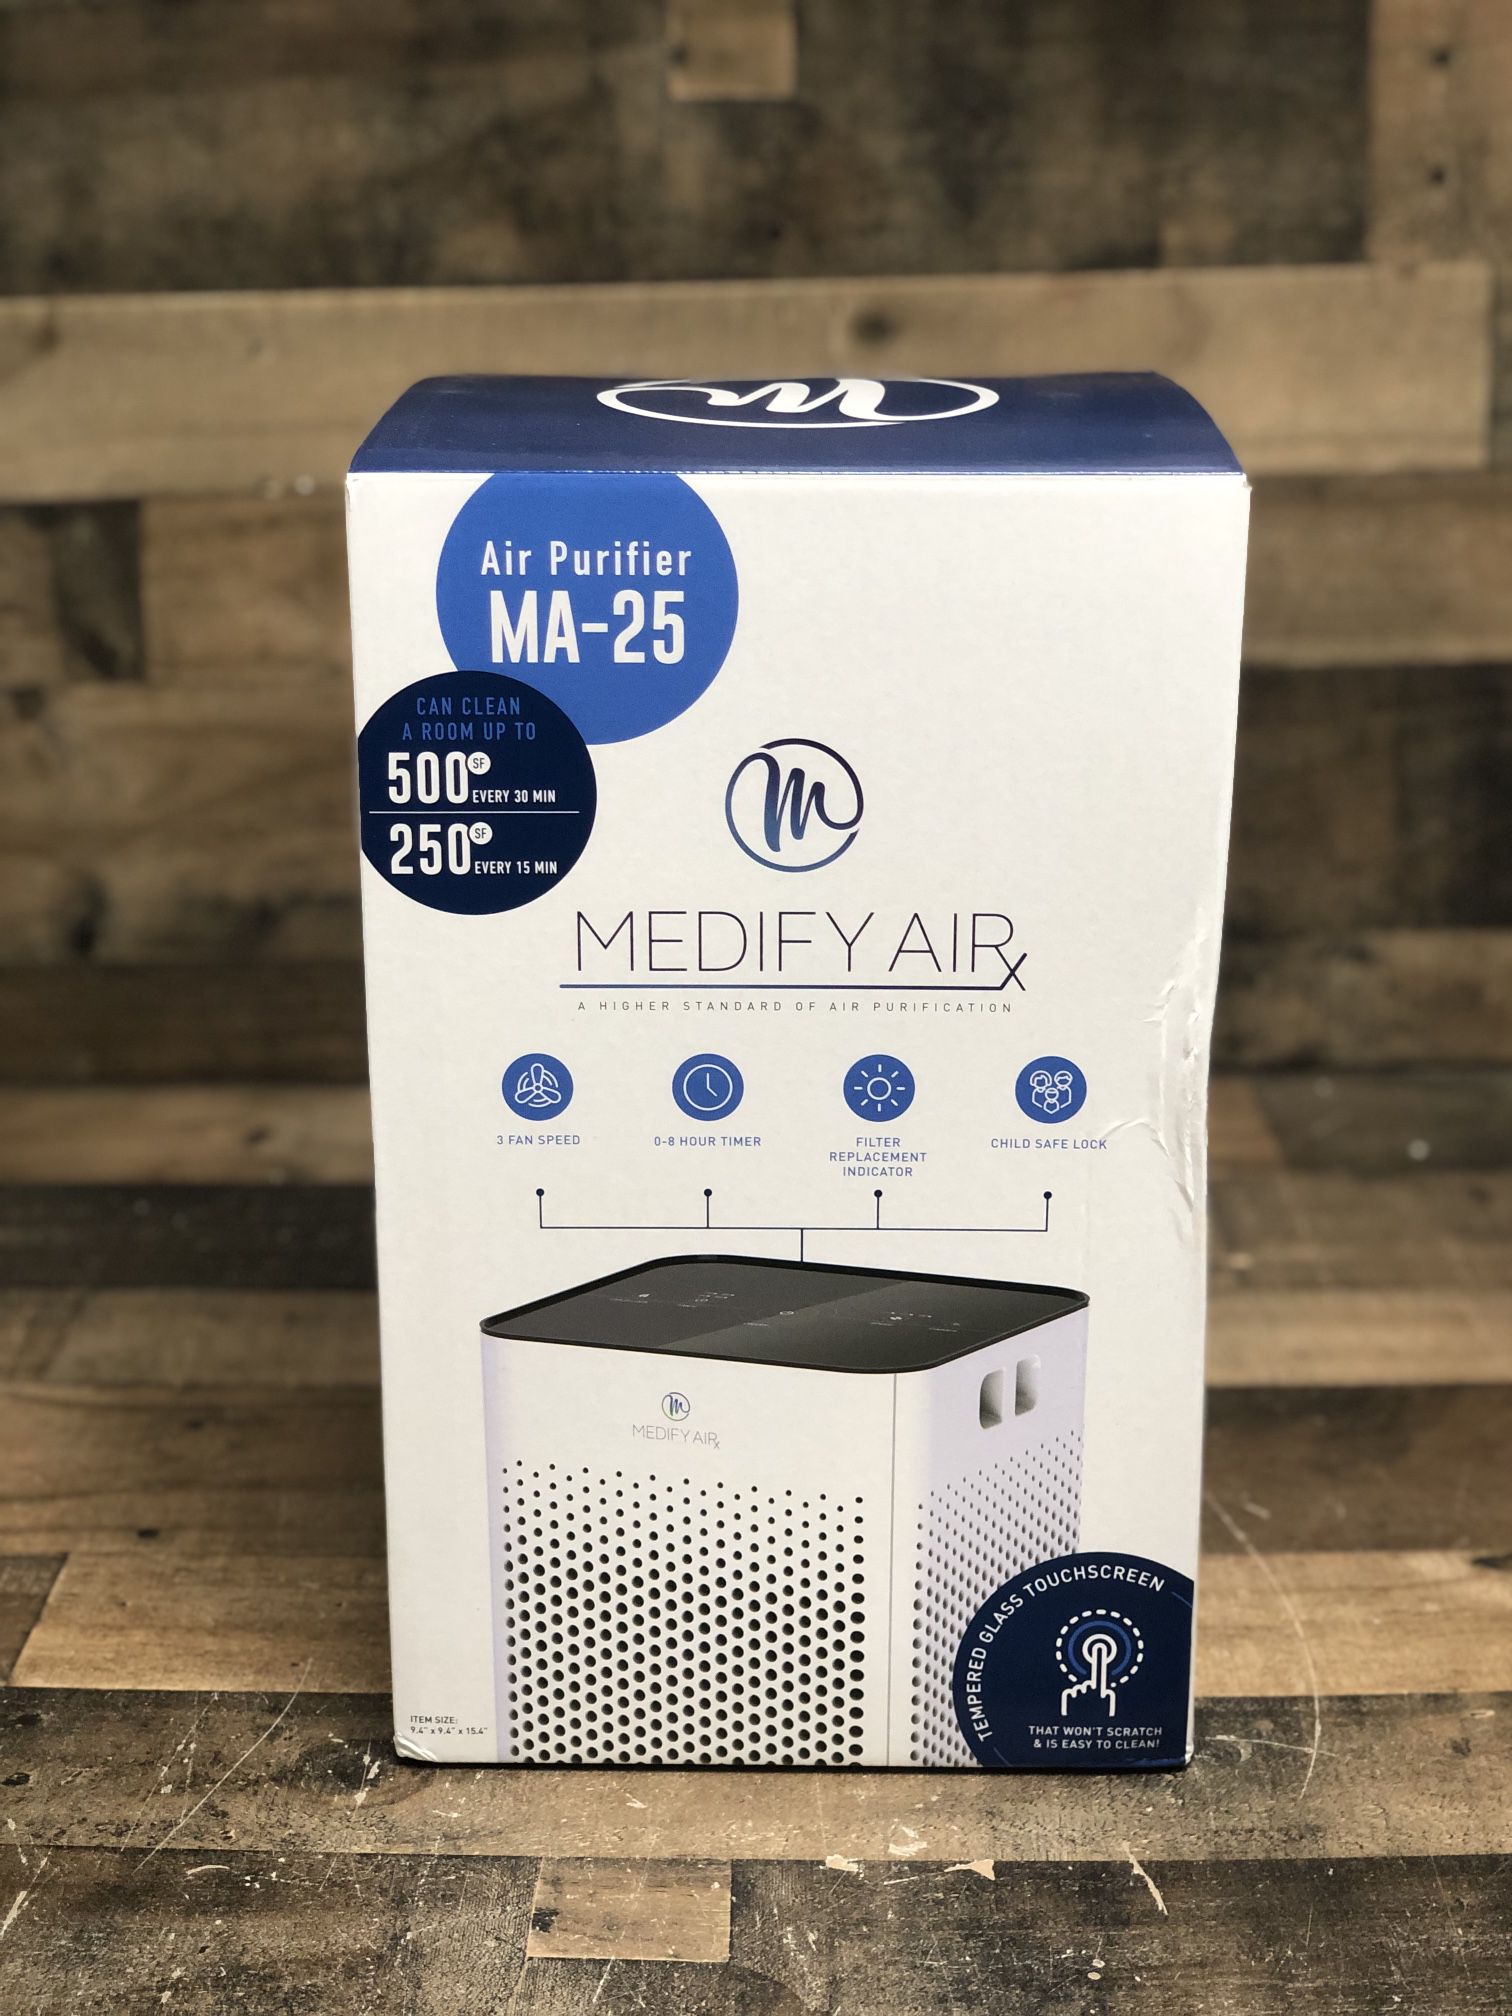 Medify Air MA-25 Air Purifier with H13 True HEPA Filter | 500 sq ft Coverage | for Allergens, Wildfire Smoke, Dust, Odors, Pollen, Pet Dander